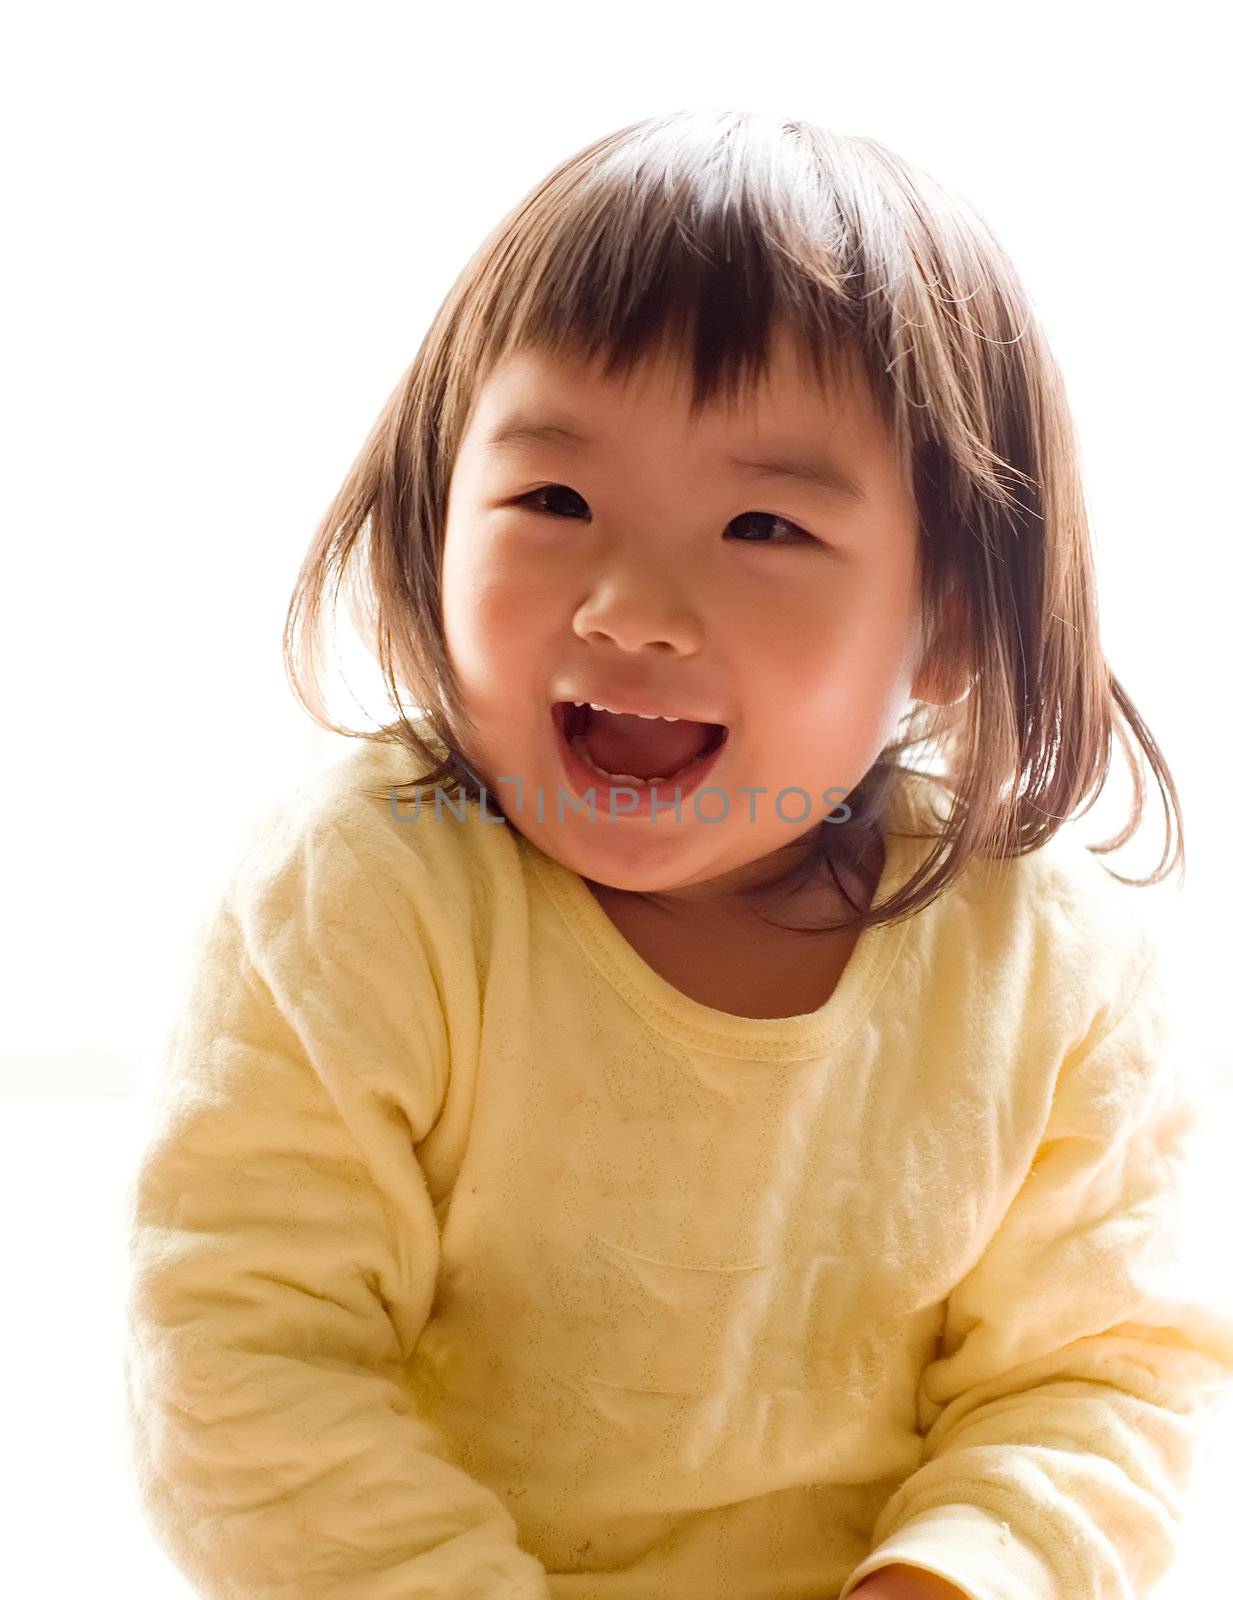 There is a happy Asian girl with smile in white background.